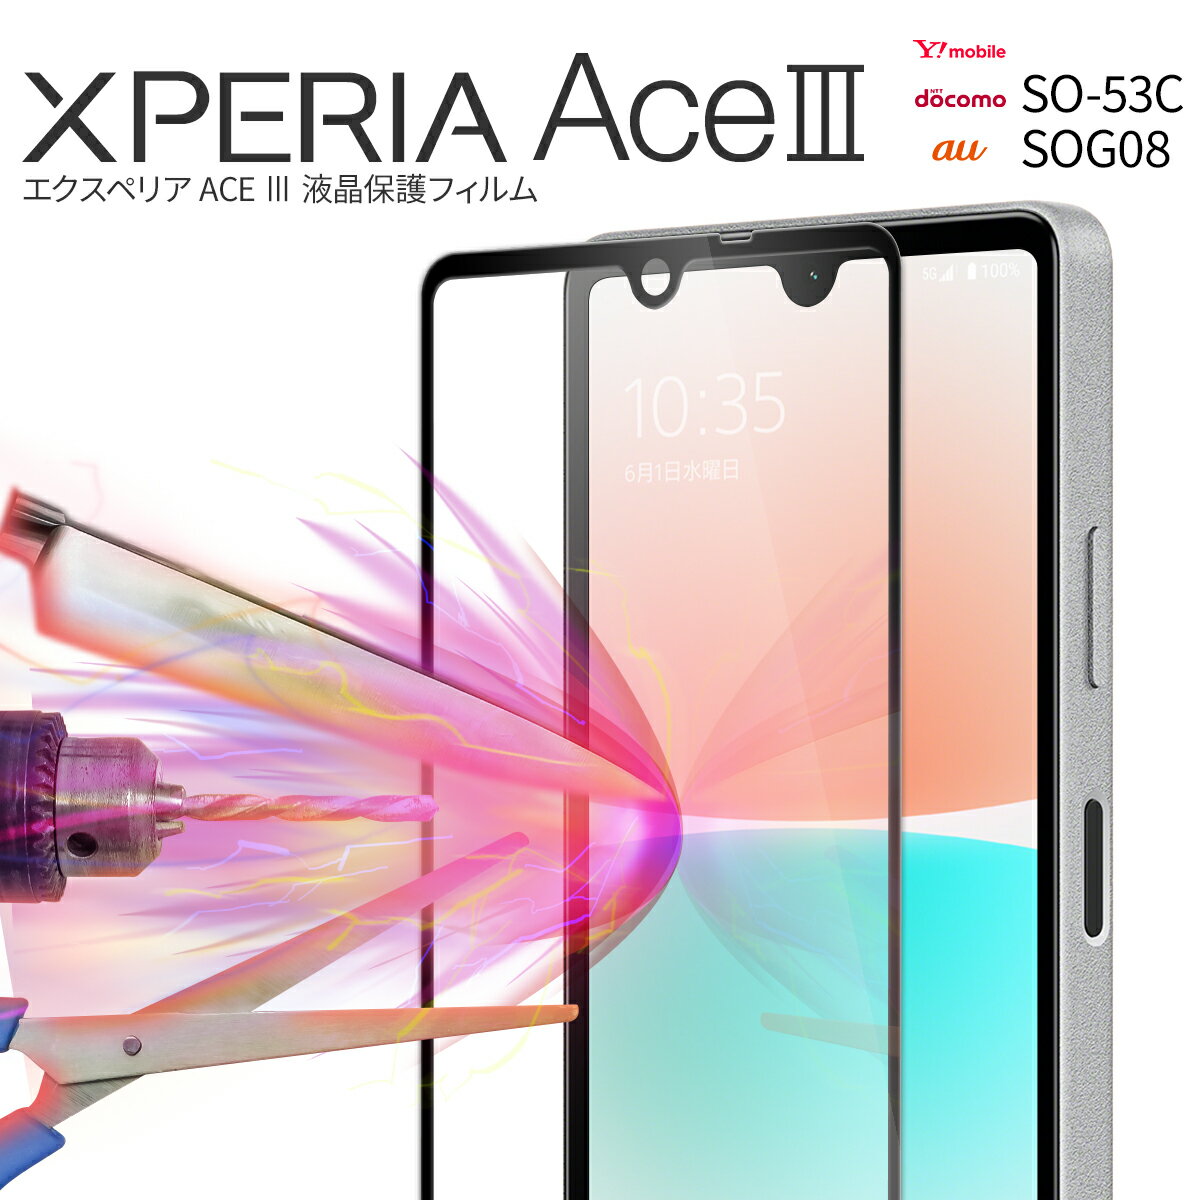  Xperia Ace III SO-53C Xperia Ace III ガラスフィルム Xperia Ace III フィルム SOG08 A203SO カラー強化ガラス保護フィルム 9H 液晶保護 傷防止 指紋防止 人気 おすすめ